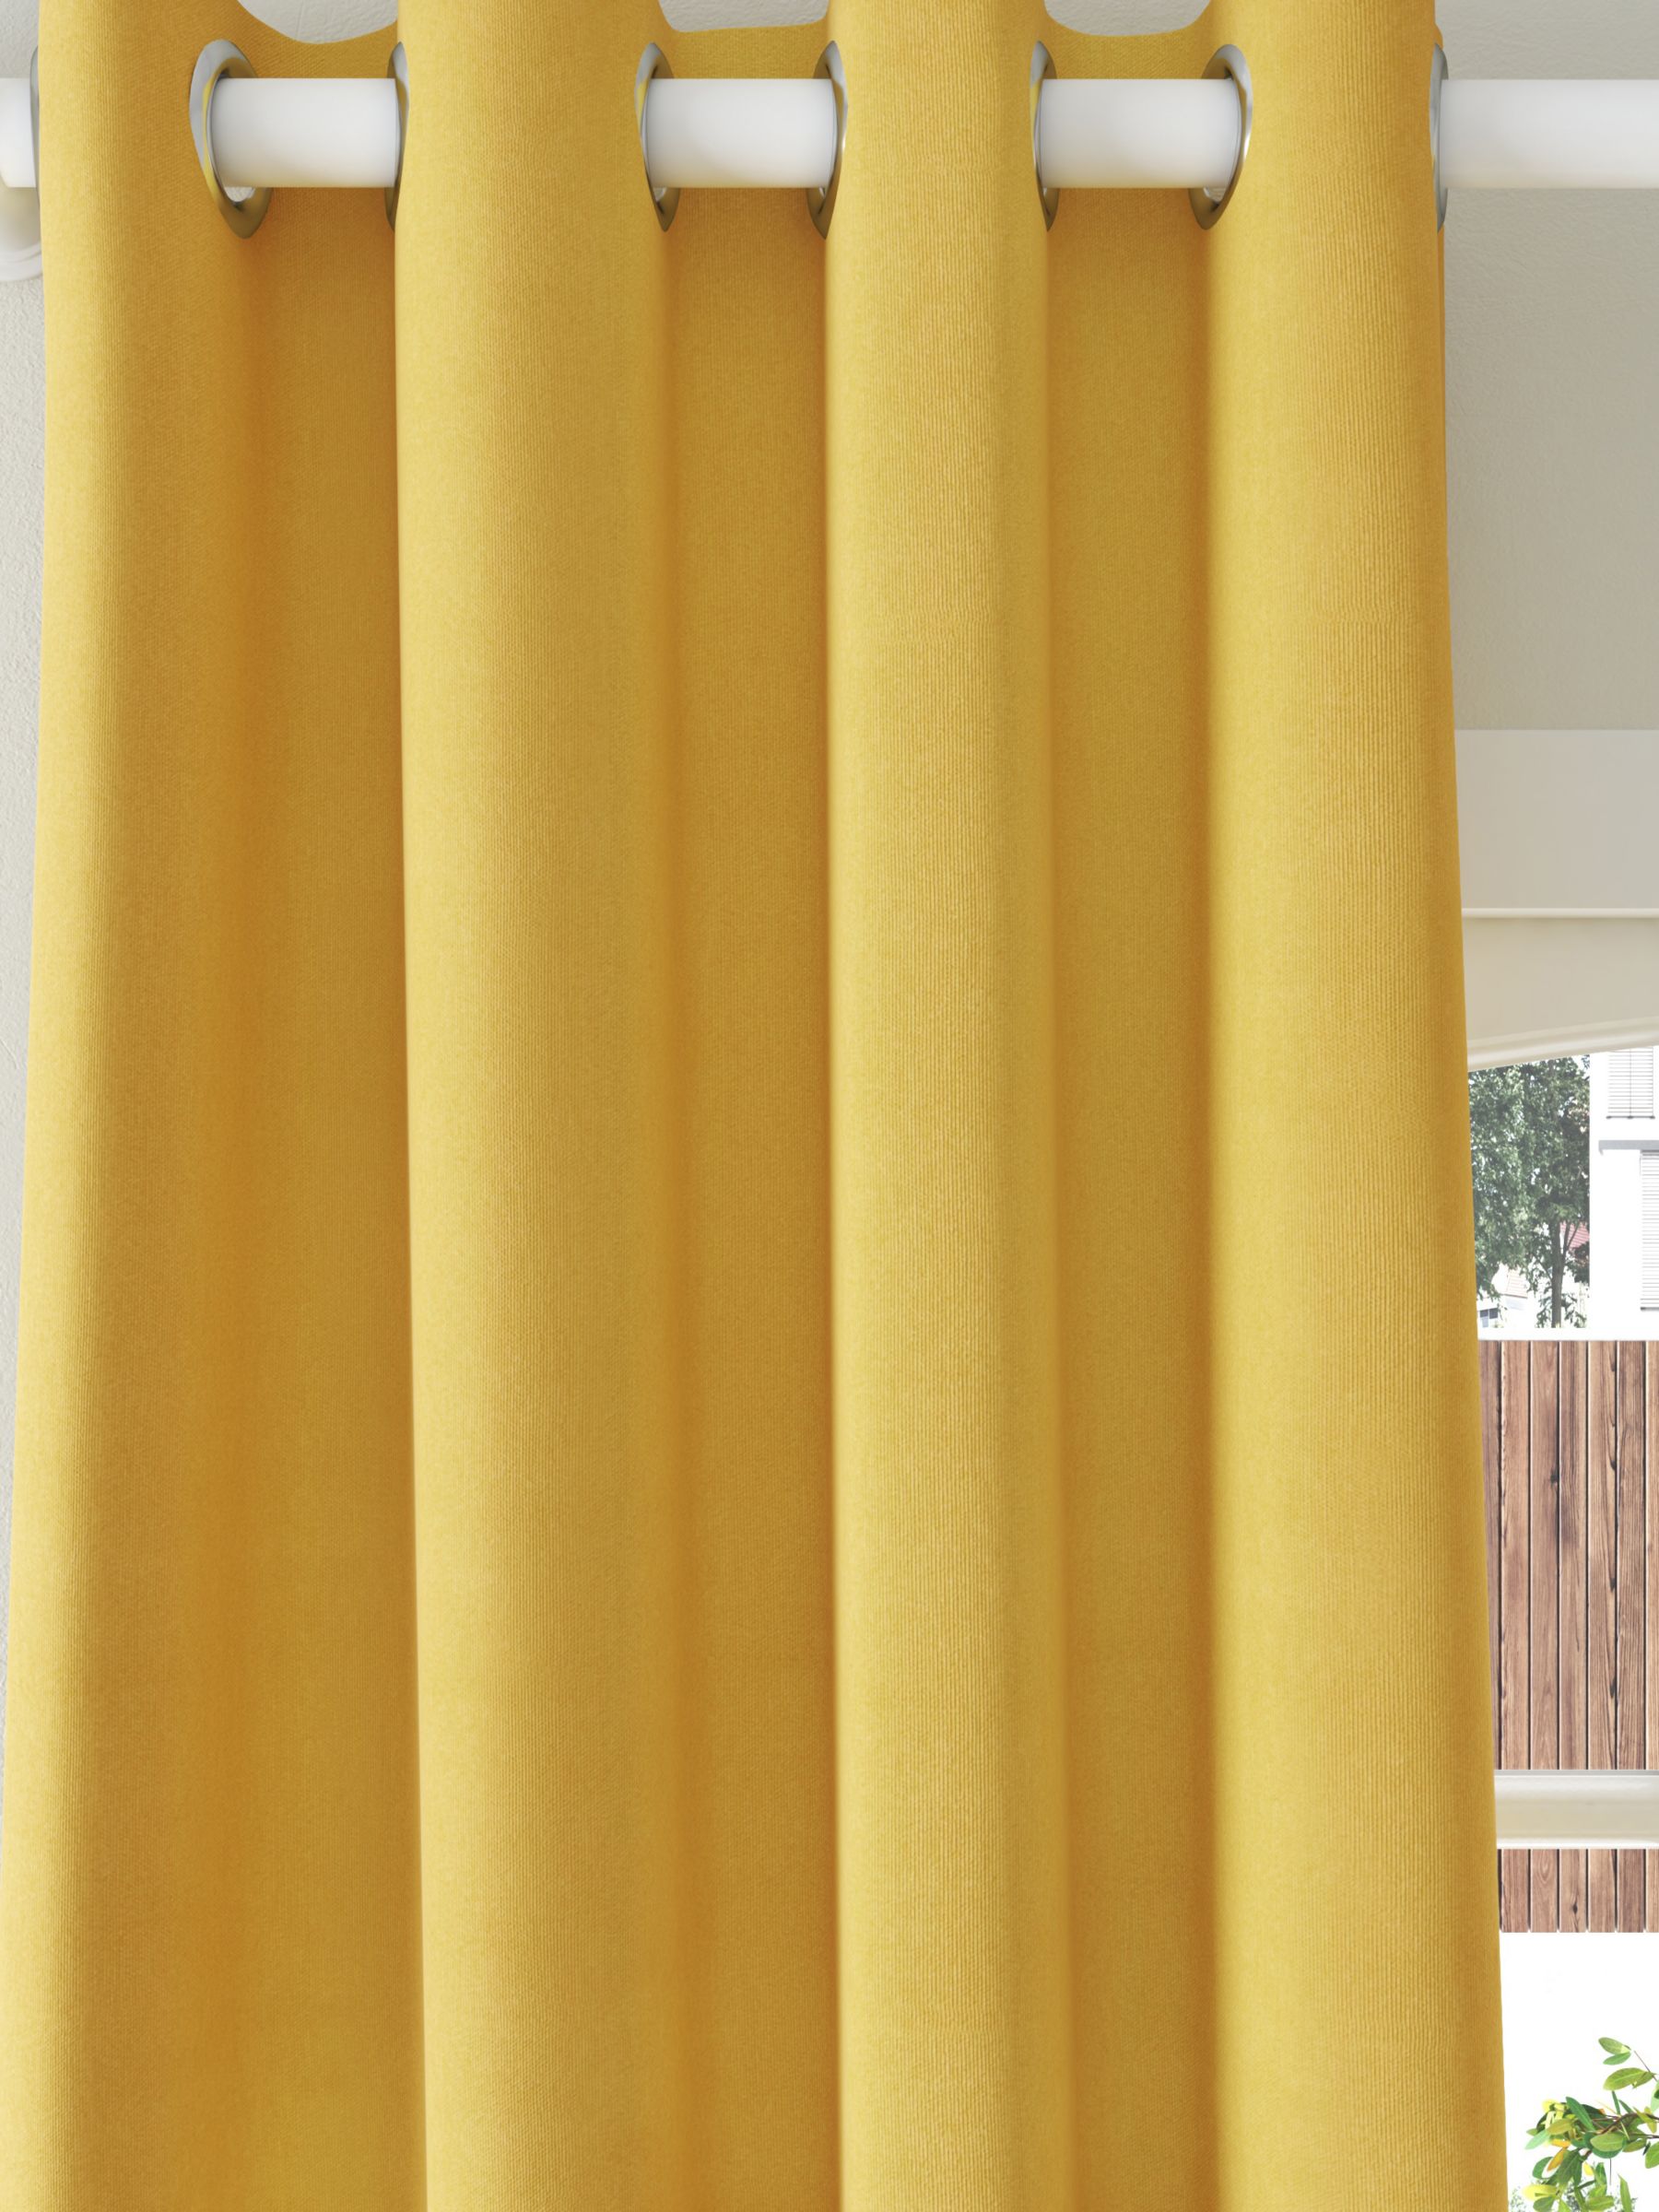 ANYDAY John Lewis & Partners Arlo Pair Lined Eyelet Curtains